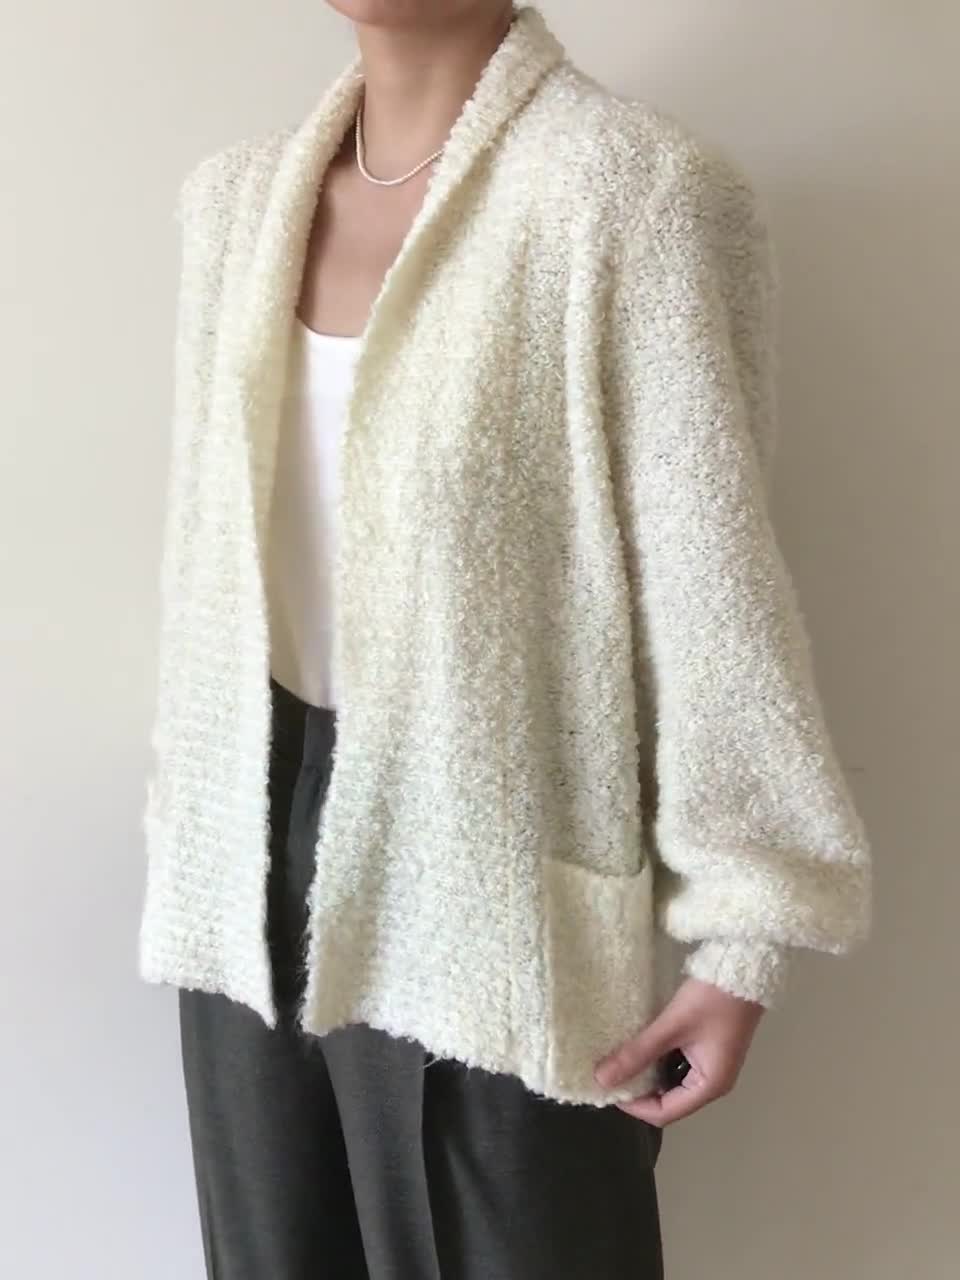 Vintage Sweater Vintage Cardigan White Sweater Jacket Duster Bell Sleeves Textured  Sweater Knitted Minimalist Capsule Wardrobe Size S/M 